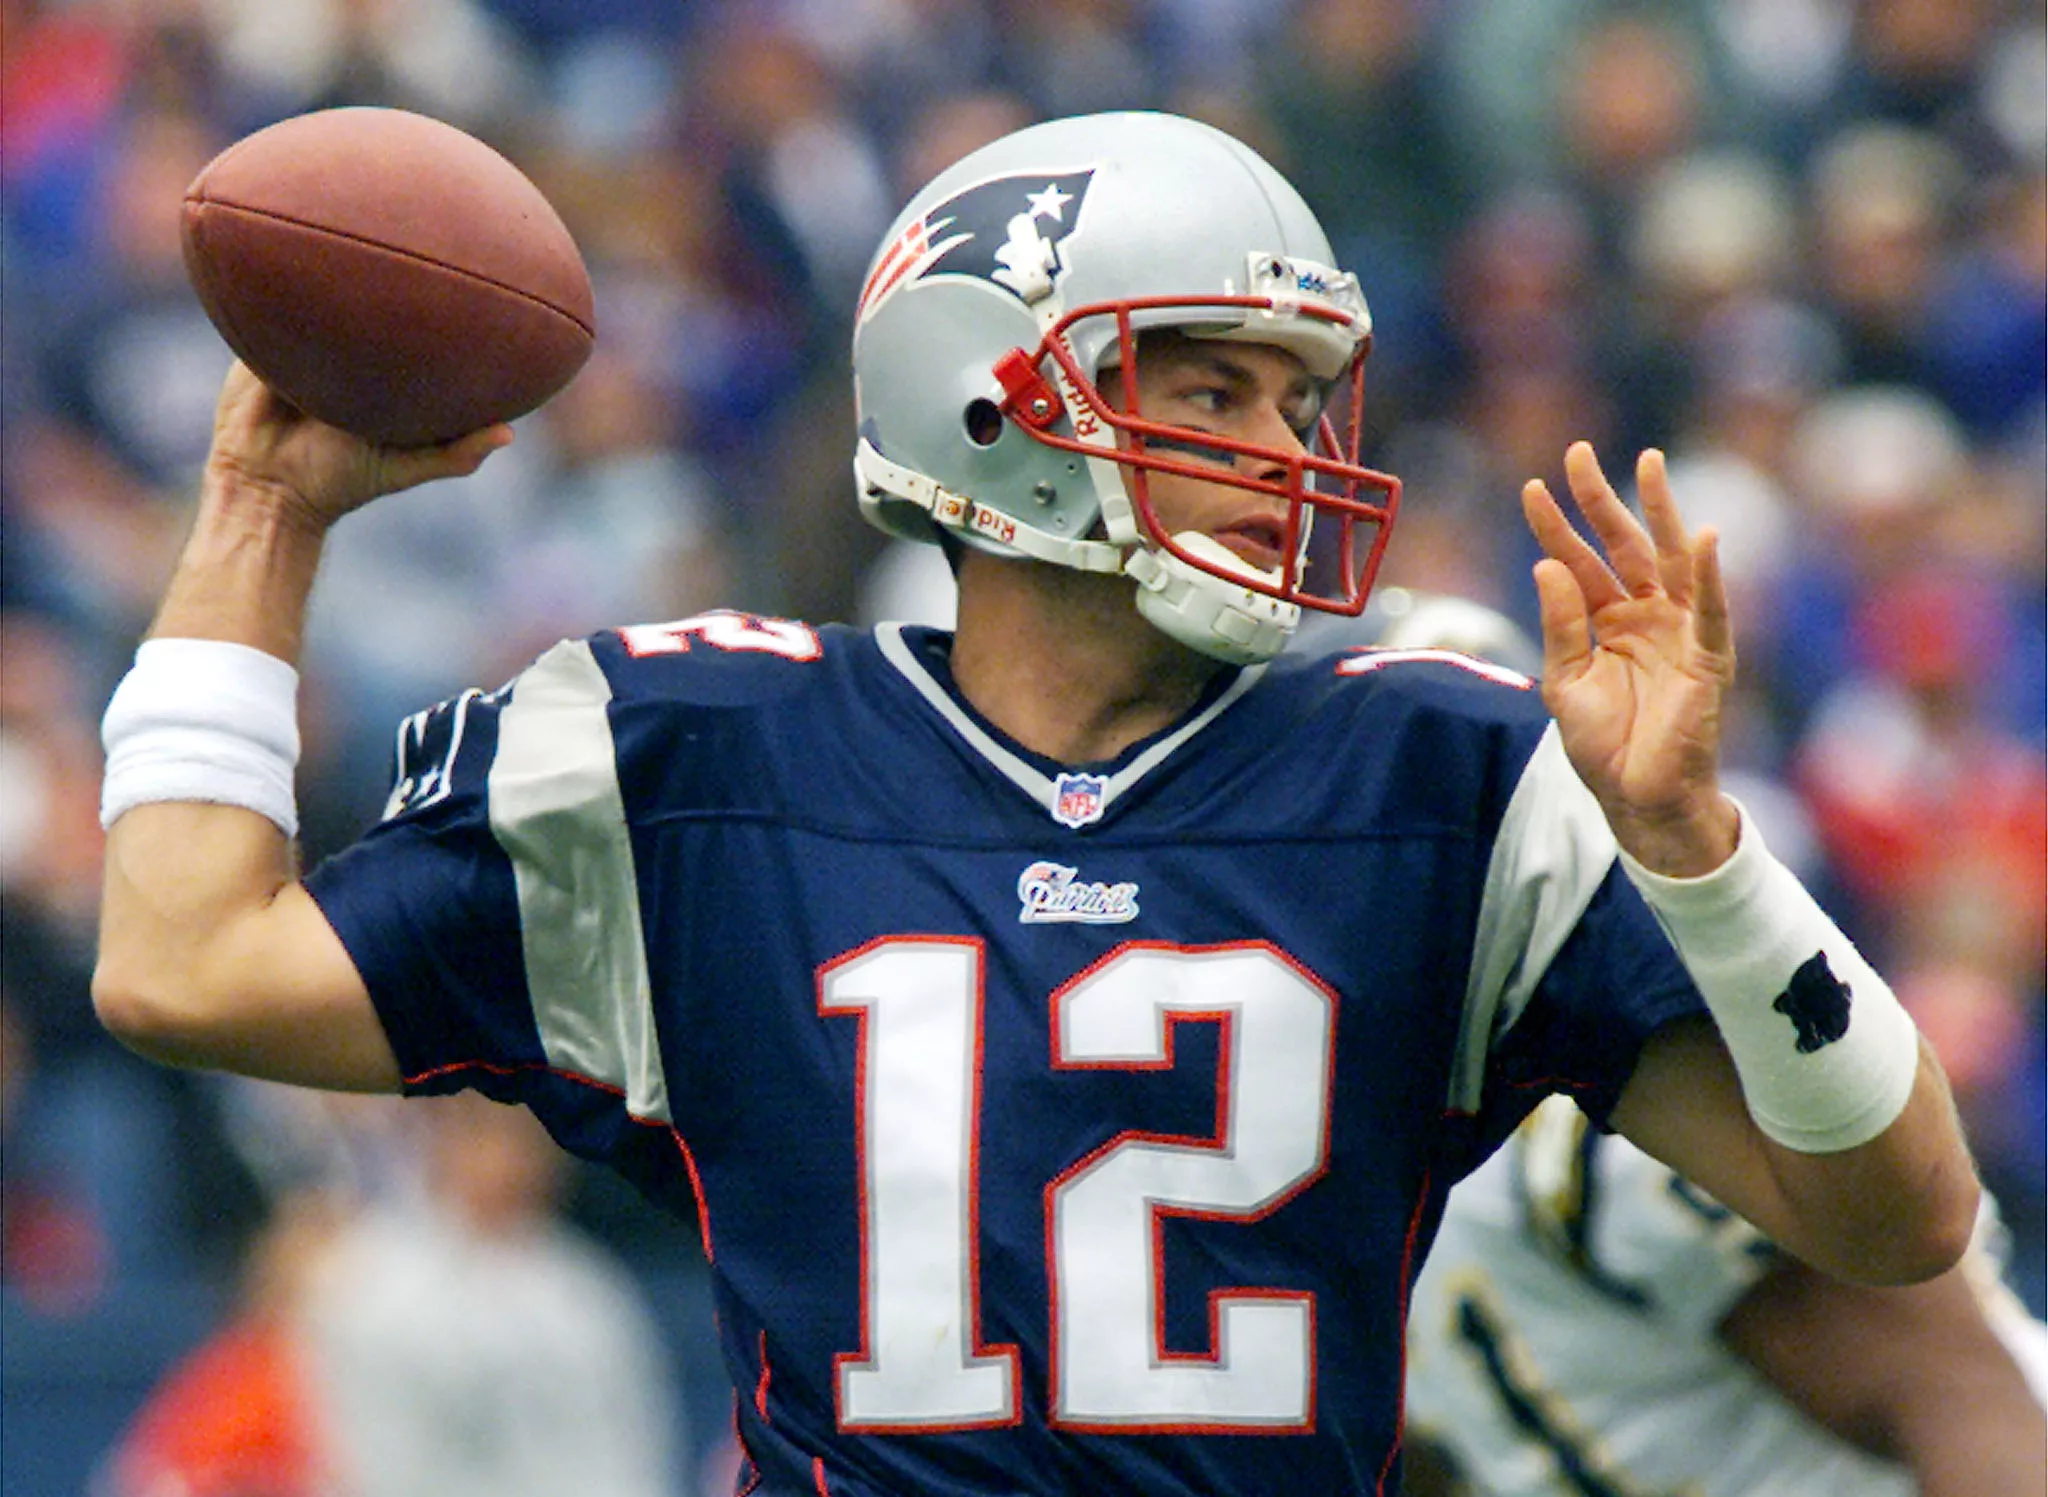 patriots-quarterbac-brady-throws-during-win-over-chargers